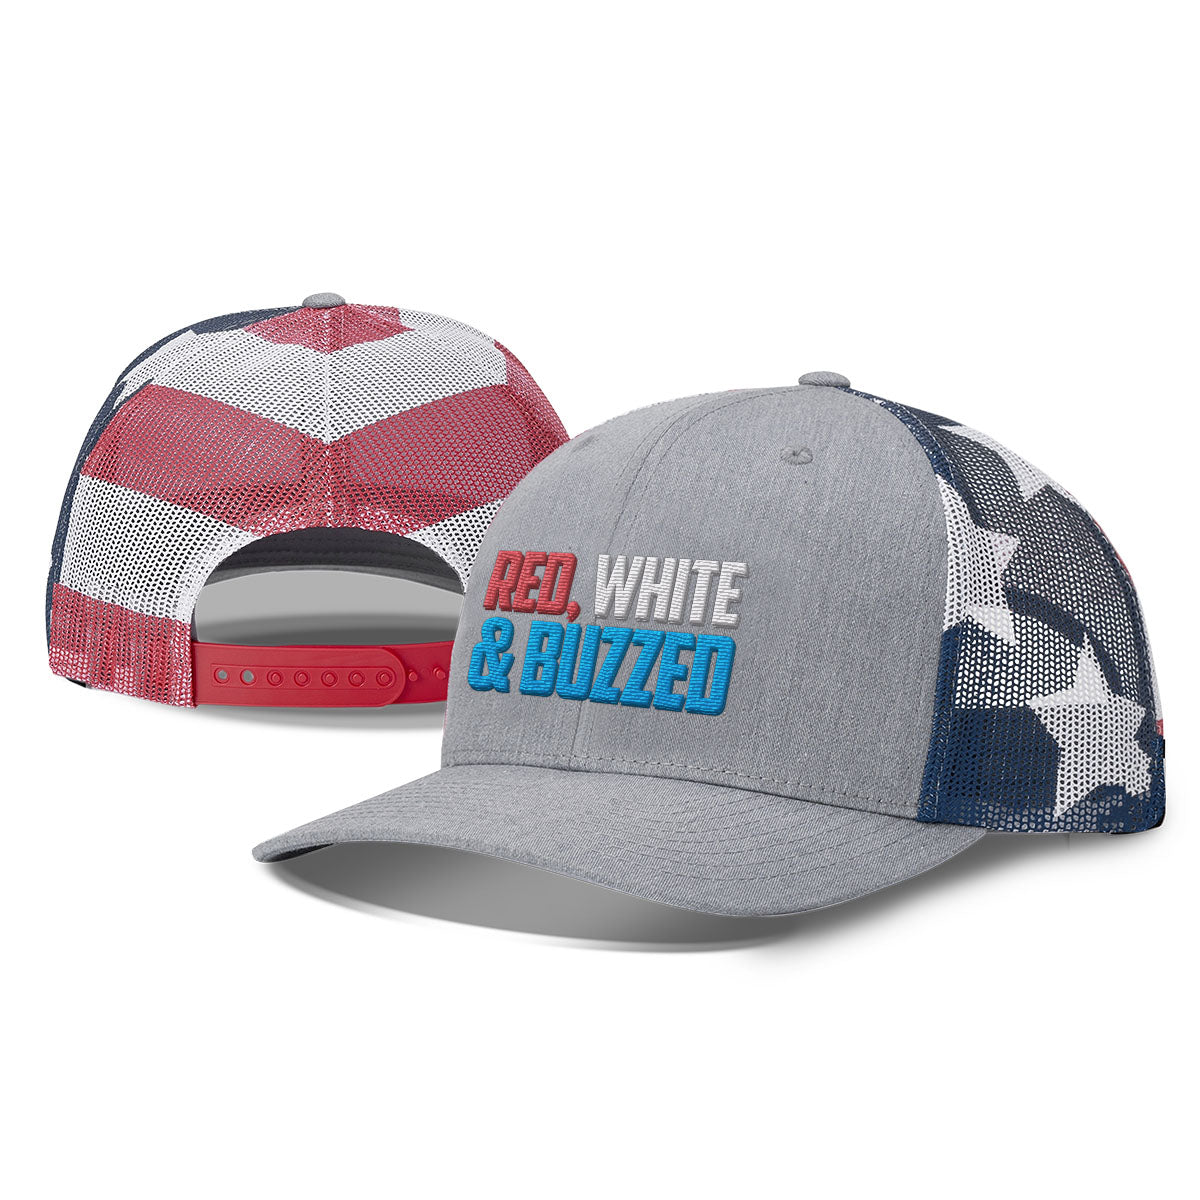 Red White And Buzzed Patriotic Hats